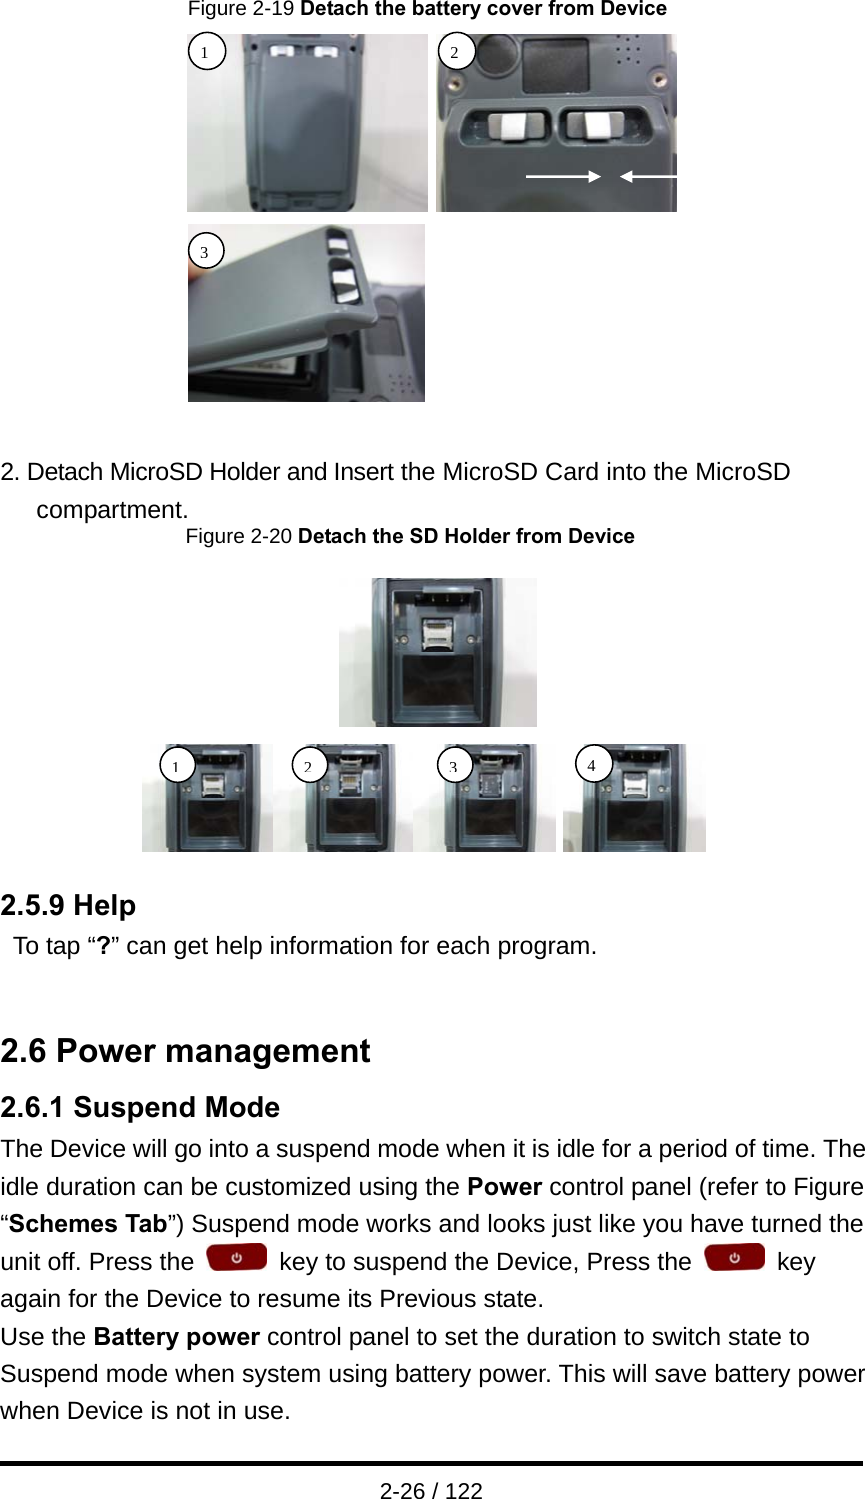  2-26 / 122 Figure 2-19 Detach the battery cover from Device   2. Detach MicroSD Holder and Insert the MicroSD Card into the MicroSD compartment.                Figure 2-20 Detach the SD Holder from Device  2.5.9 Help To tap “?” can get help information for each program.   2.6 Power management 2.6.1 Suspend Mode The Device will go into a suspend mode when it is idle for a period of time. The idle duration can be customized using the Power control panel (refer to Figure “Schemes Tab”) Suspend mode works and looks just like you have turned the unit off. Press the    key to suspend the Device, Press the   key again for the Device to resume its Previous state. Use the Battery power control panel to set the duration to switch state to Suspend mode when system using battery power. This will save battery power when Device is not in use.   1243132